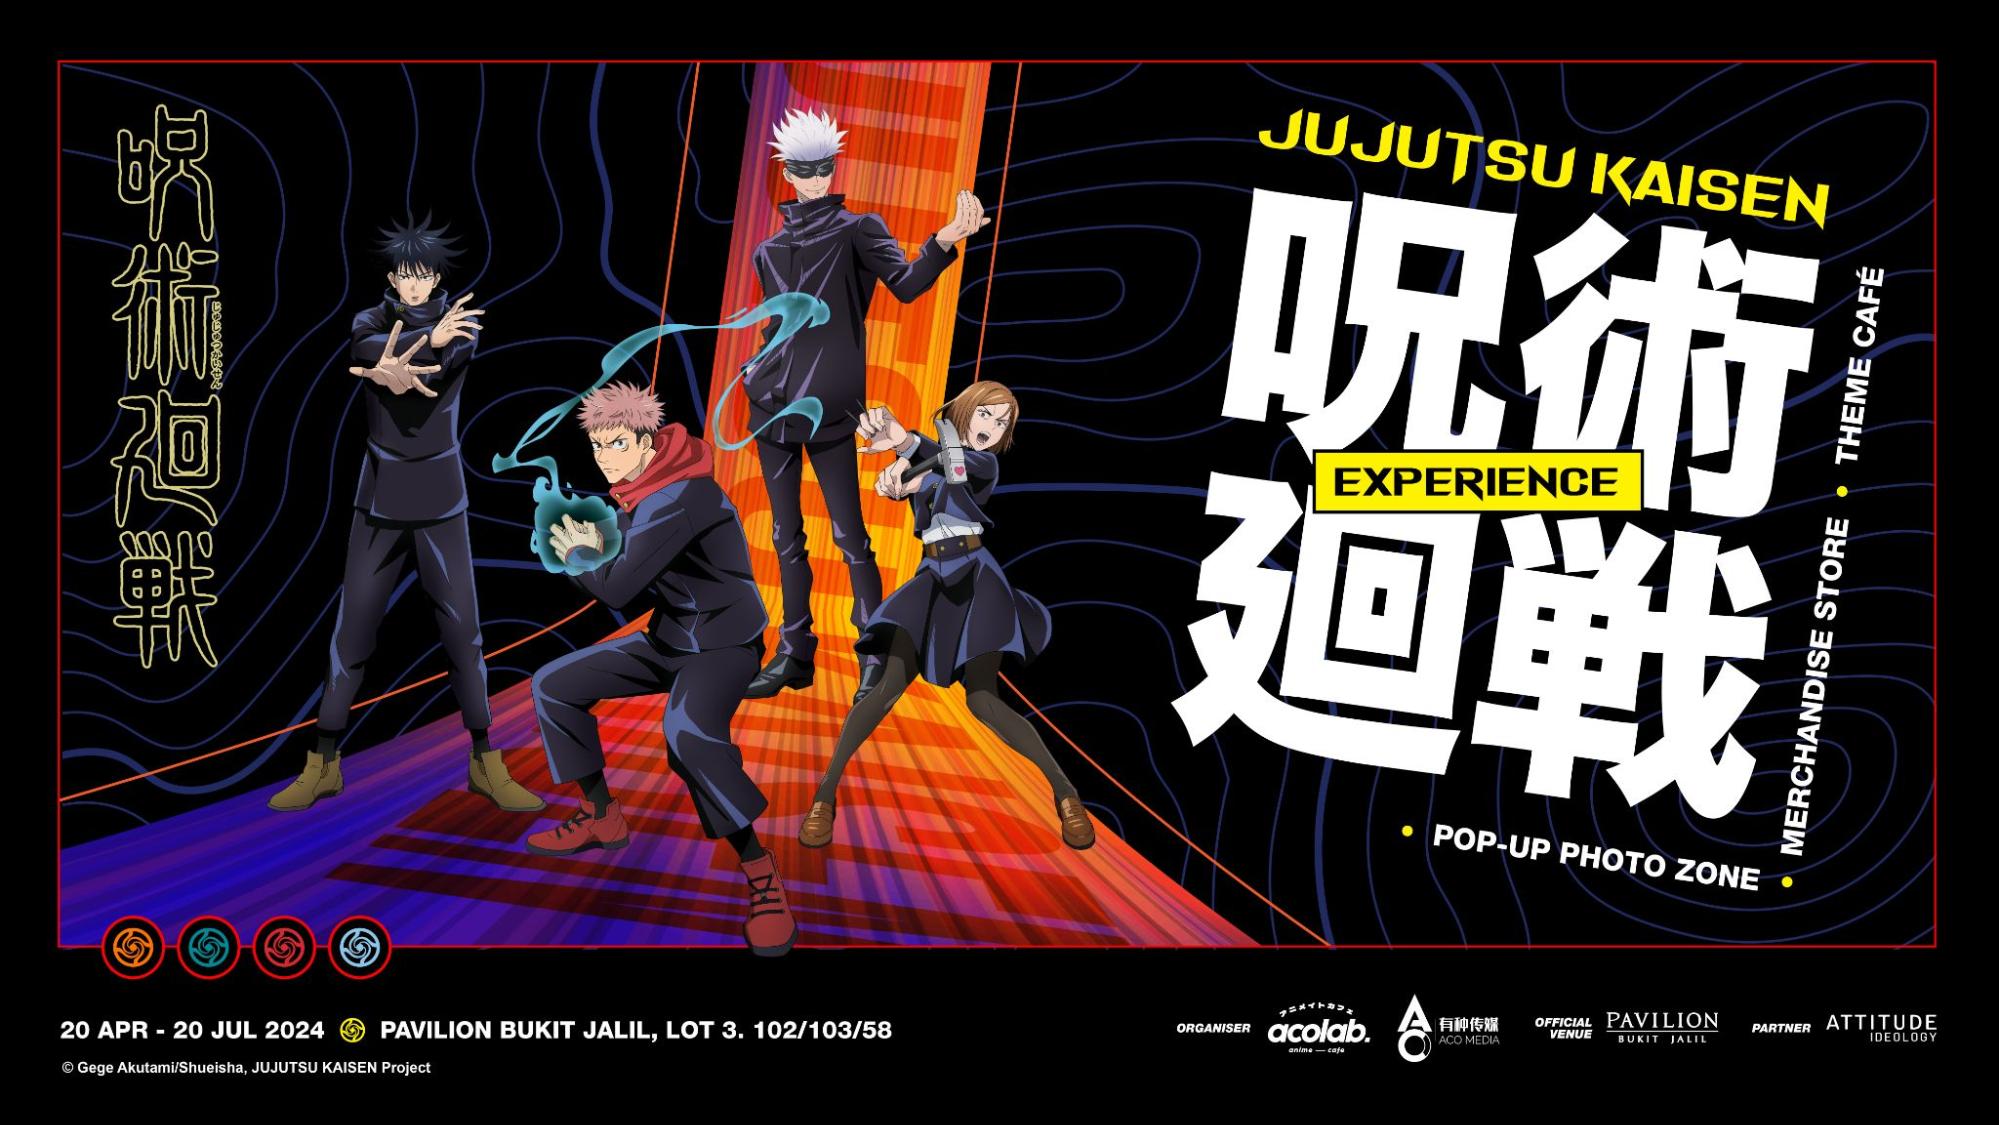 Pop-up events and exhibitions in Malaysia - Jujutsu Kaisen